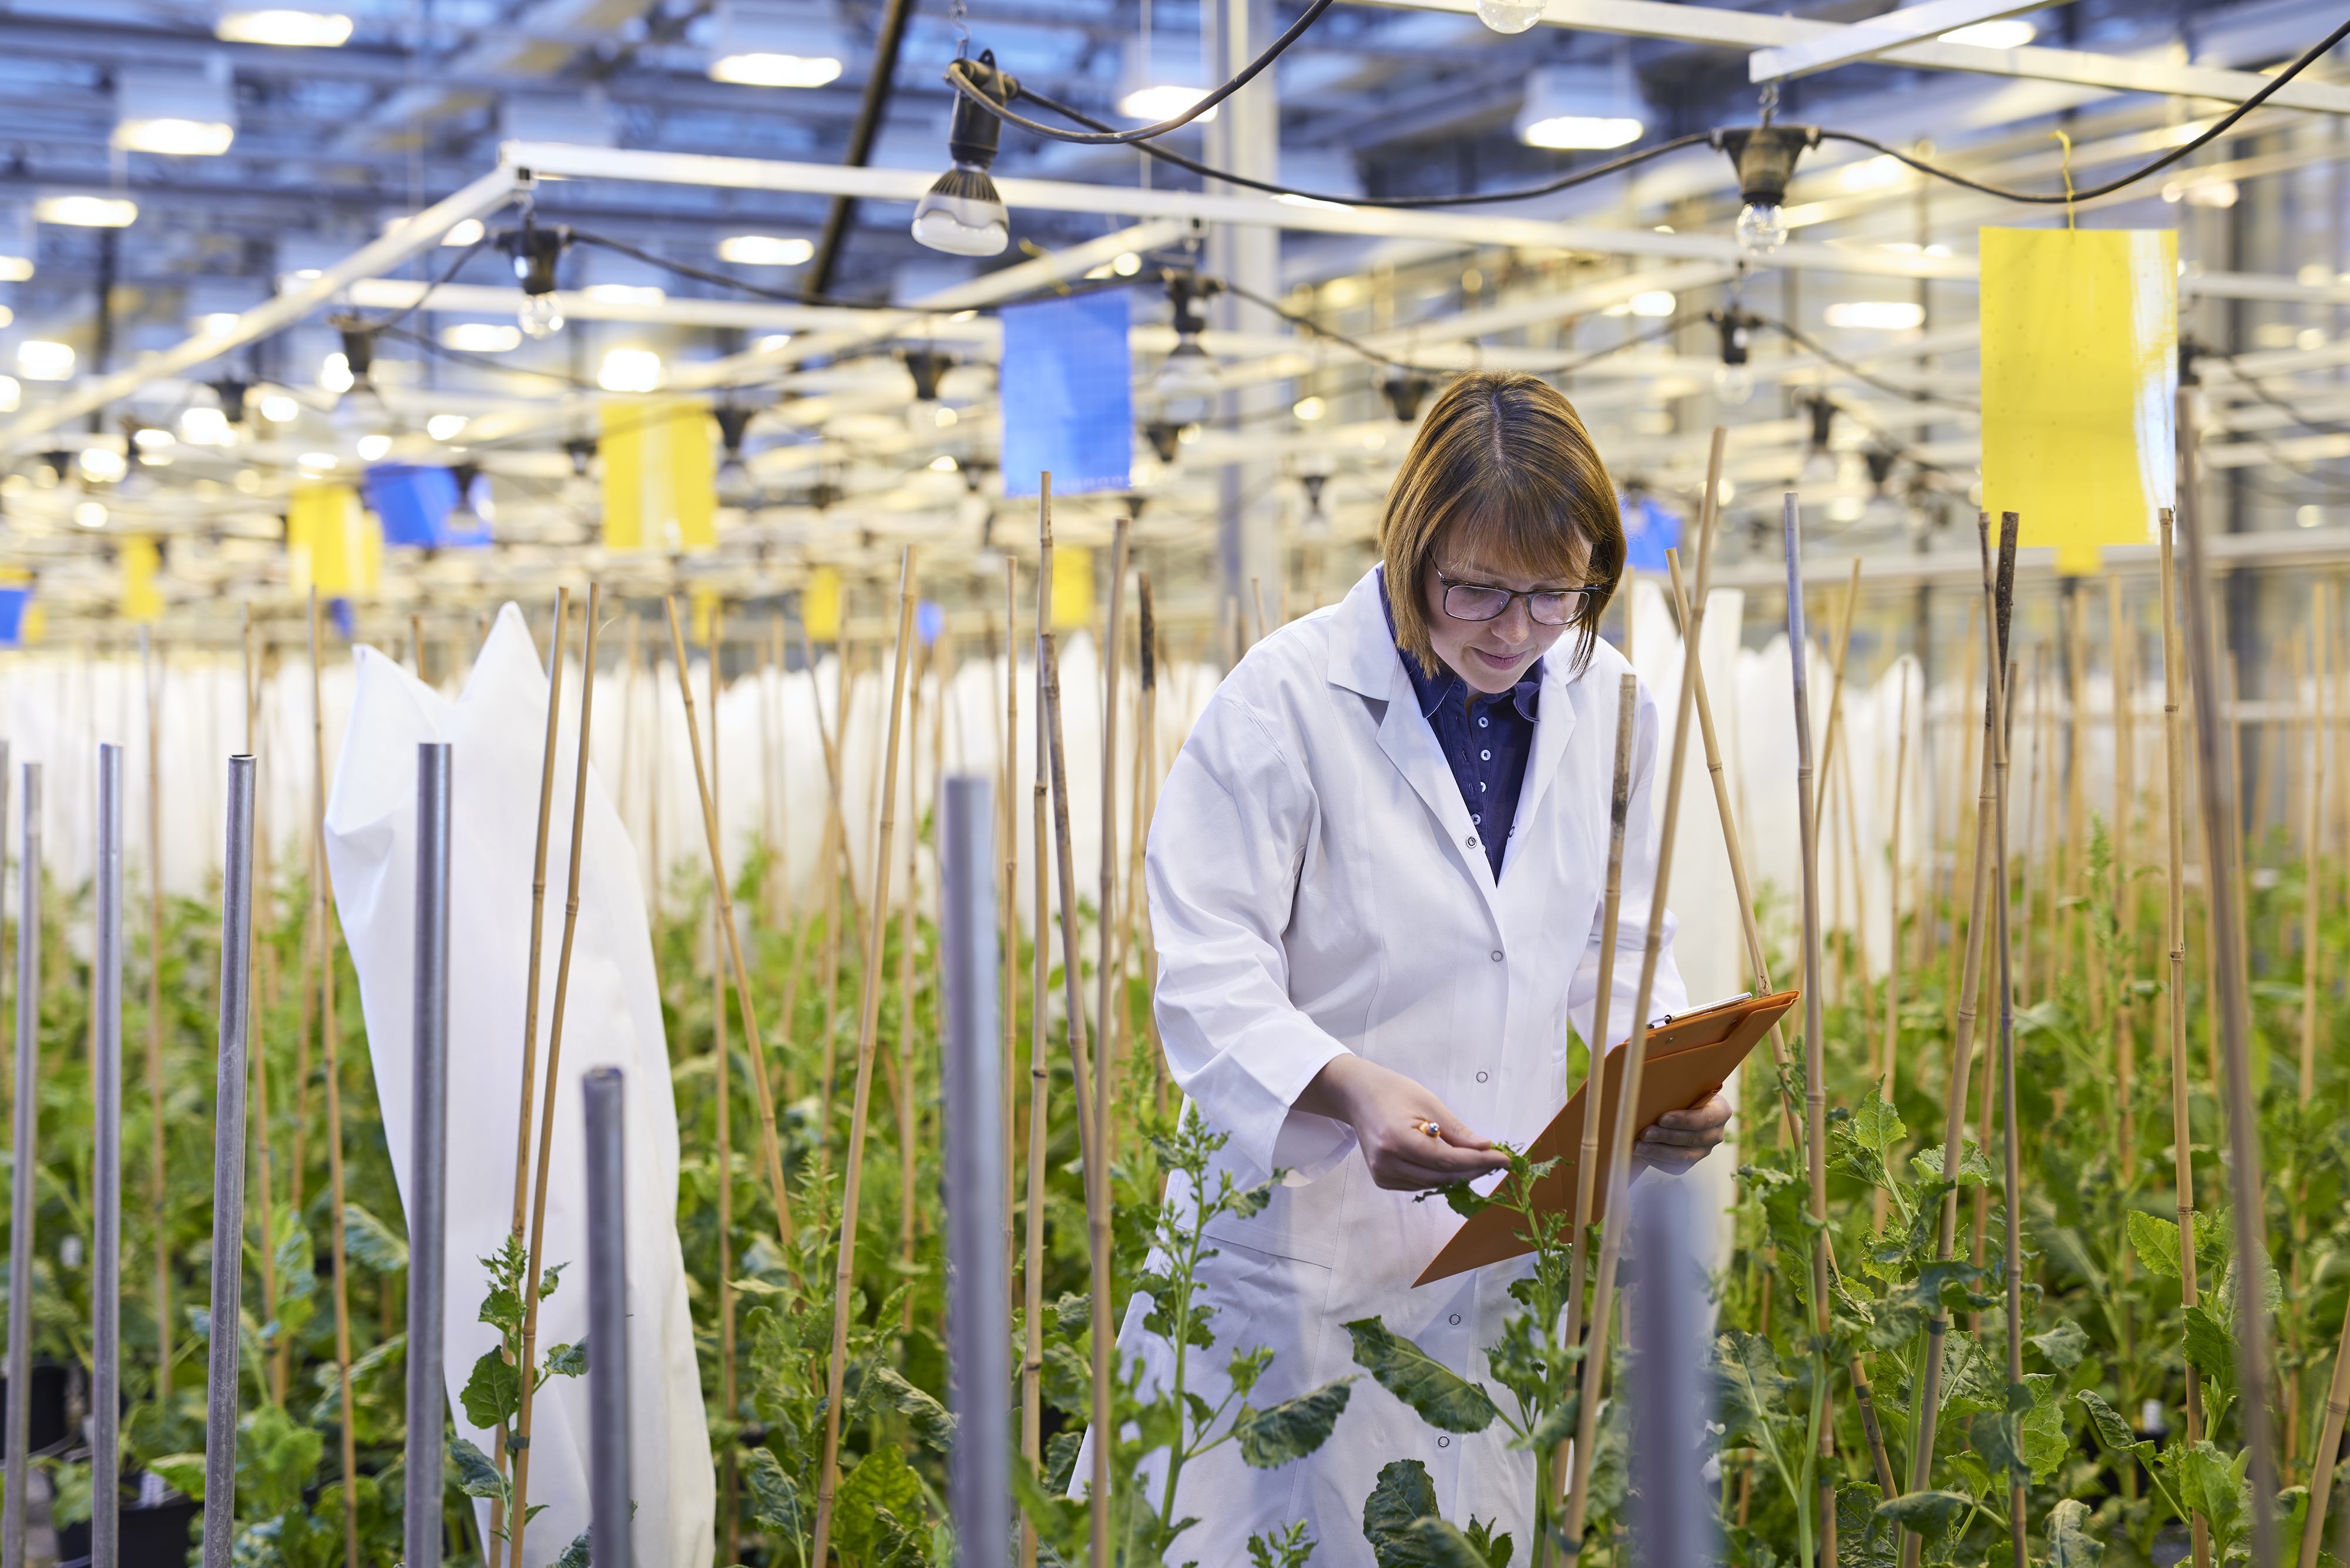 Plant breeders need as much biodiversity as possible in their work.